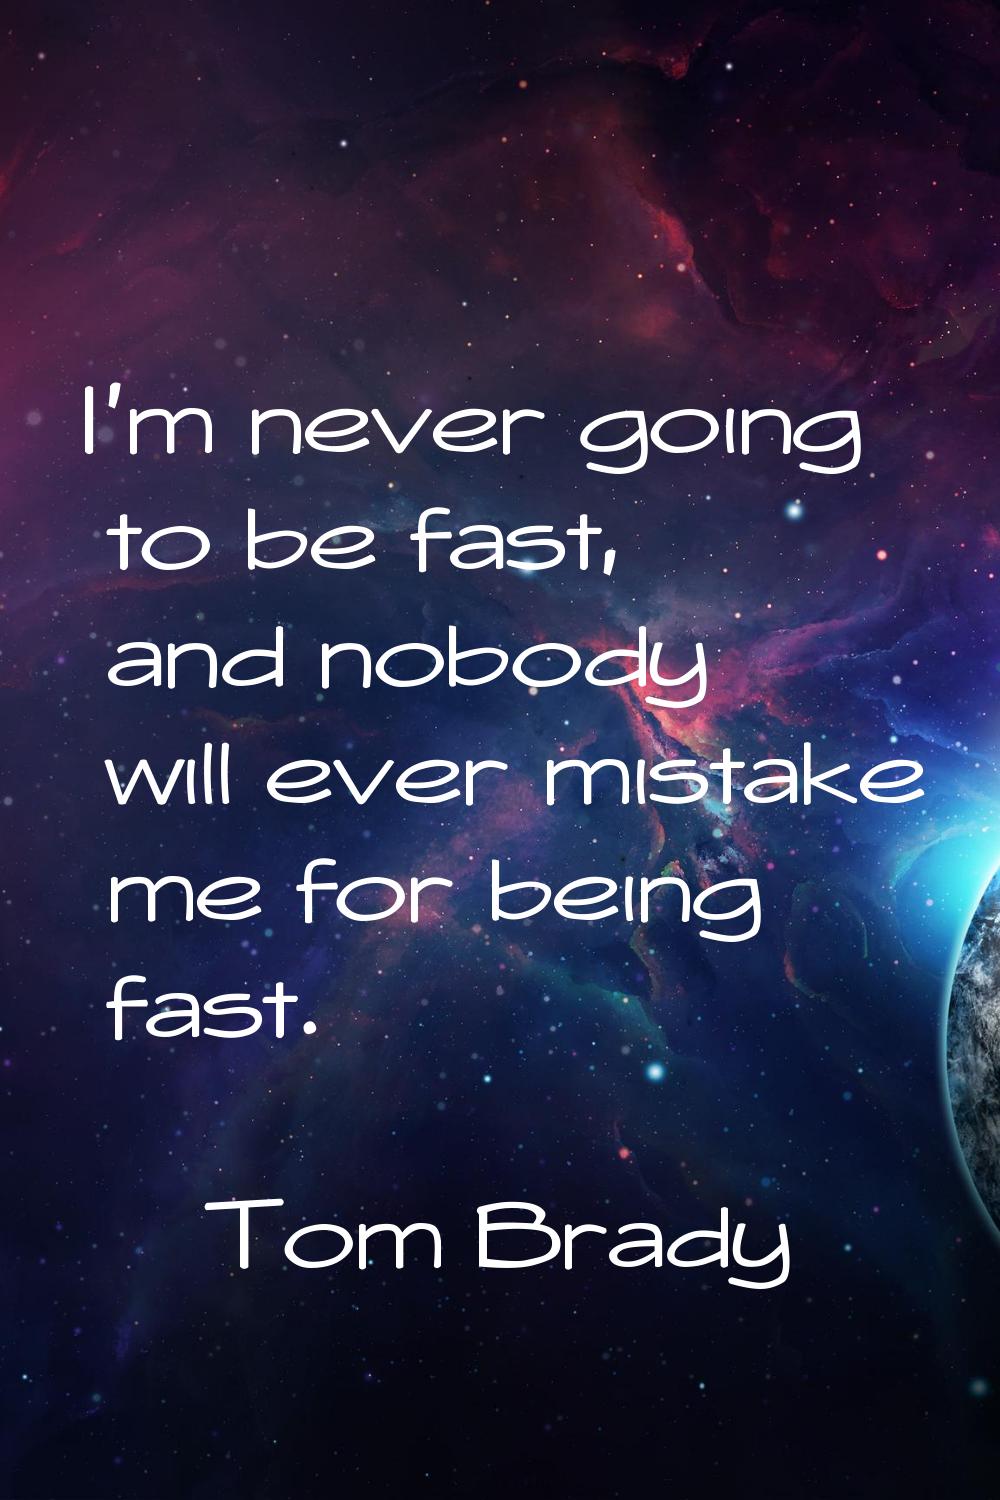 I'm never going to be fast, and nobody will ever mistake me for being fast.